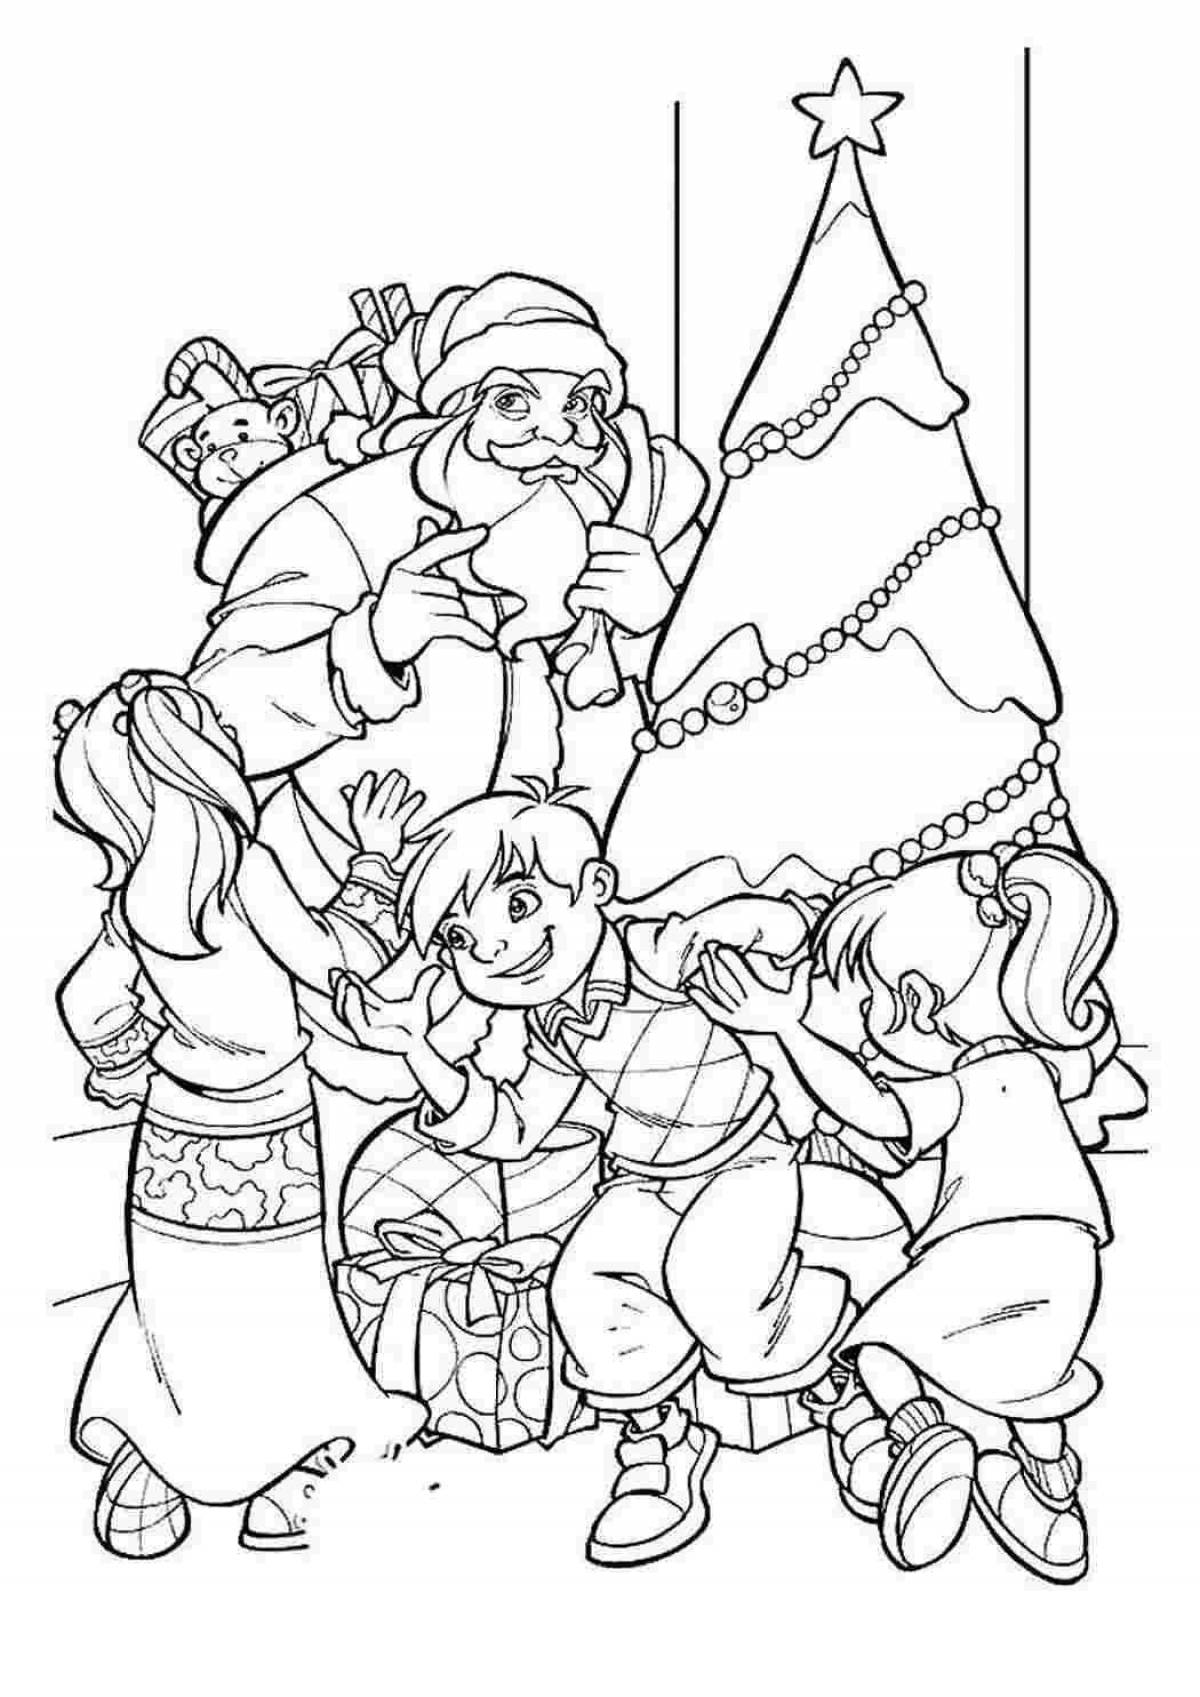 Coloring page perky round dance around the tree